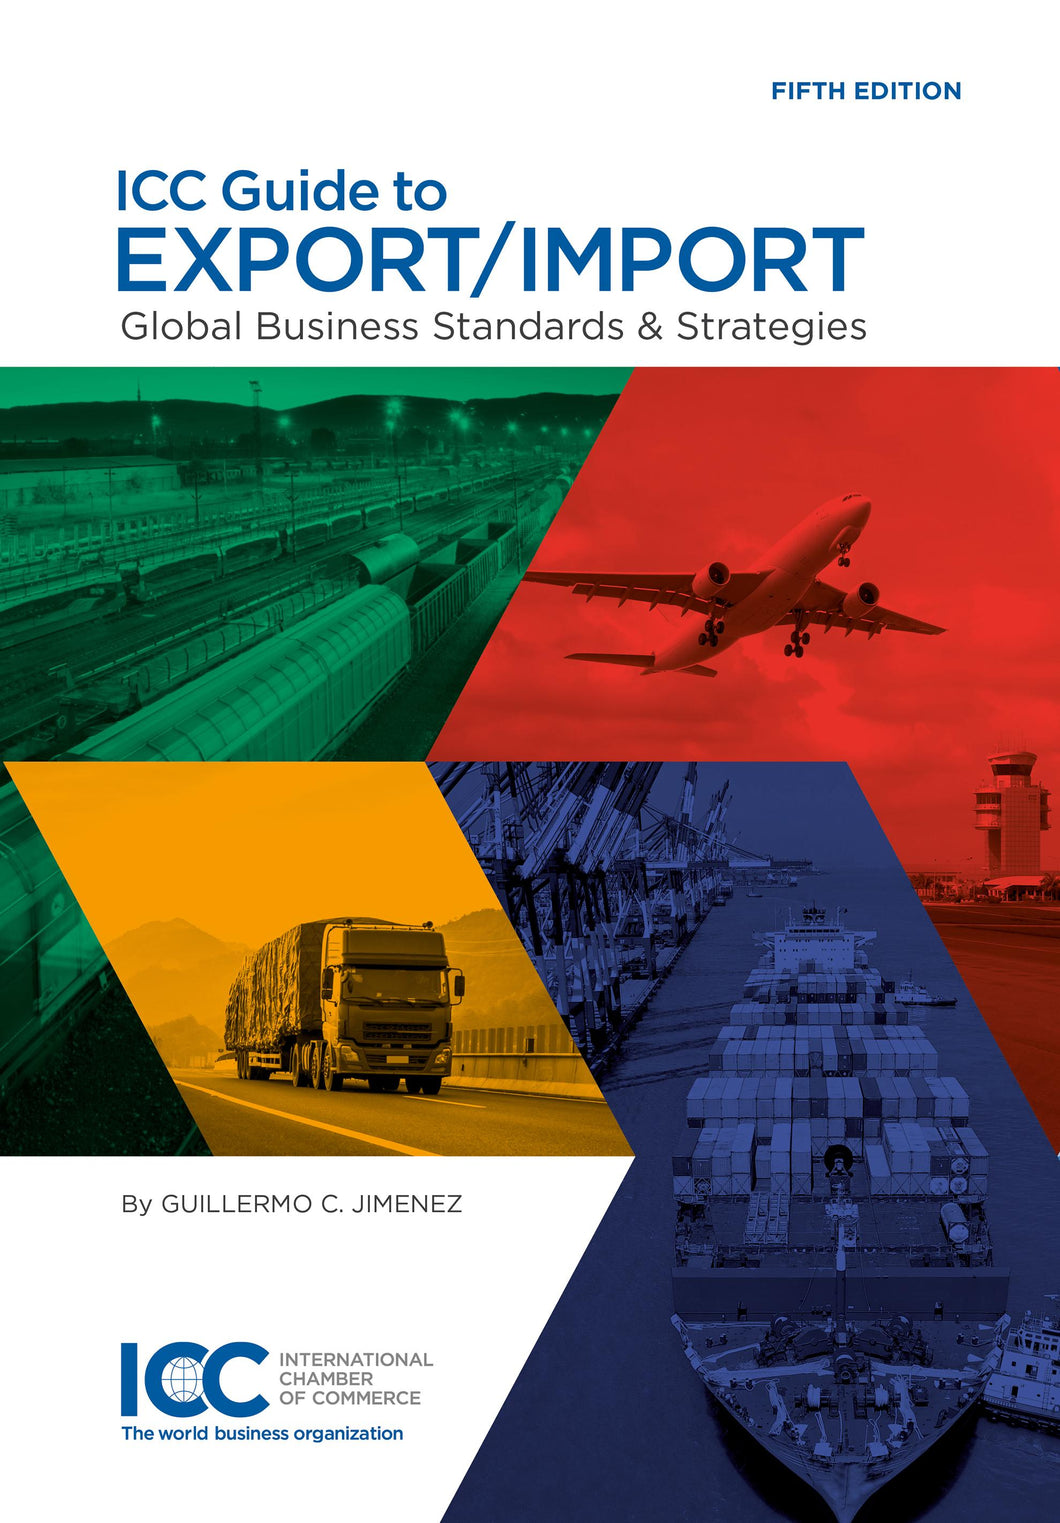 ICC Guide to Export/Import